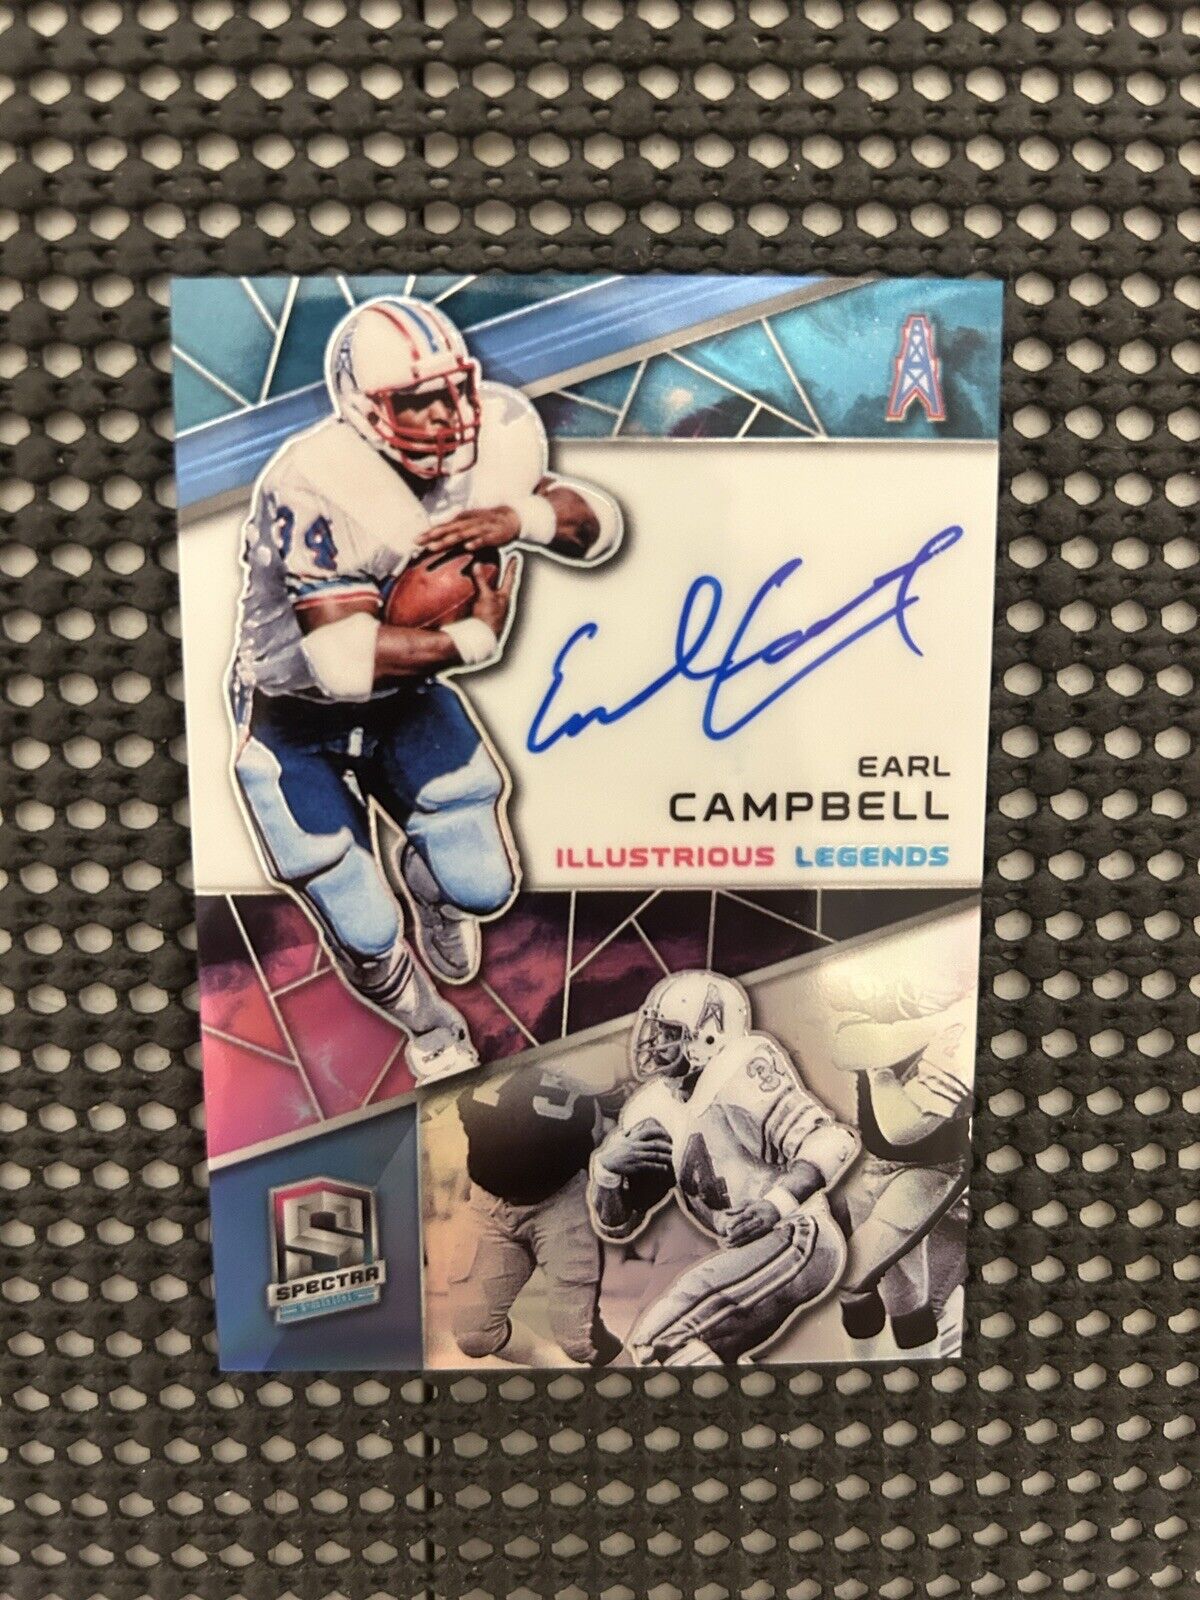 2019 Panini Spectra Earl Campbell Illustrious Legends Auto 2 /2 Oilers